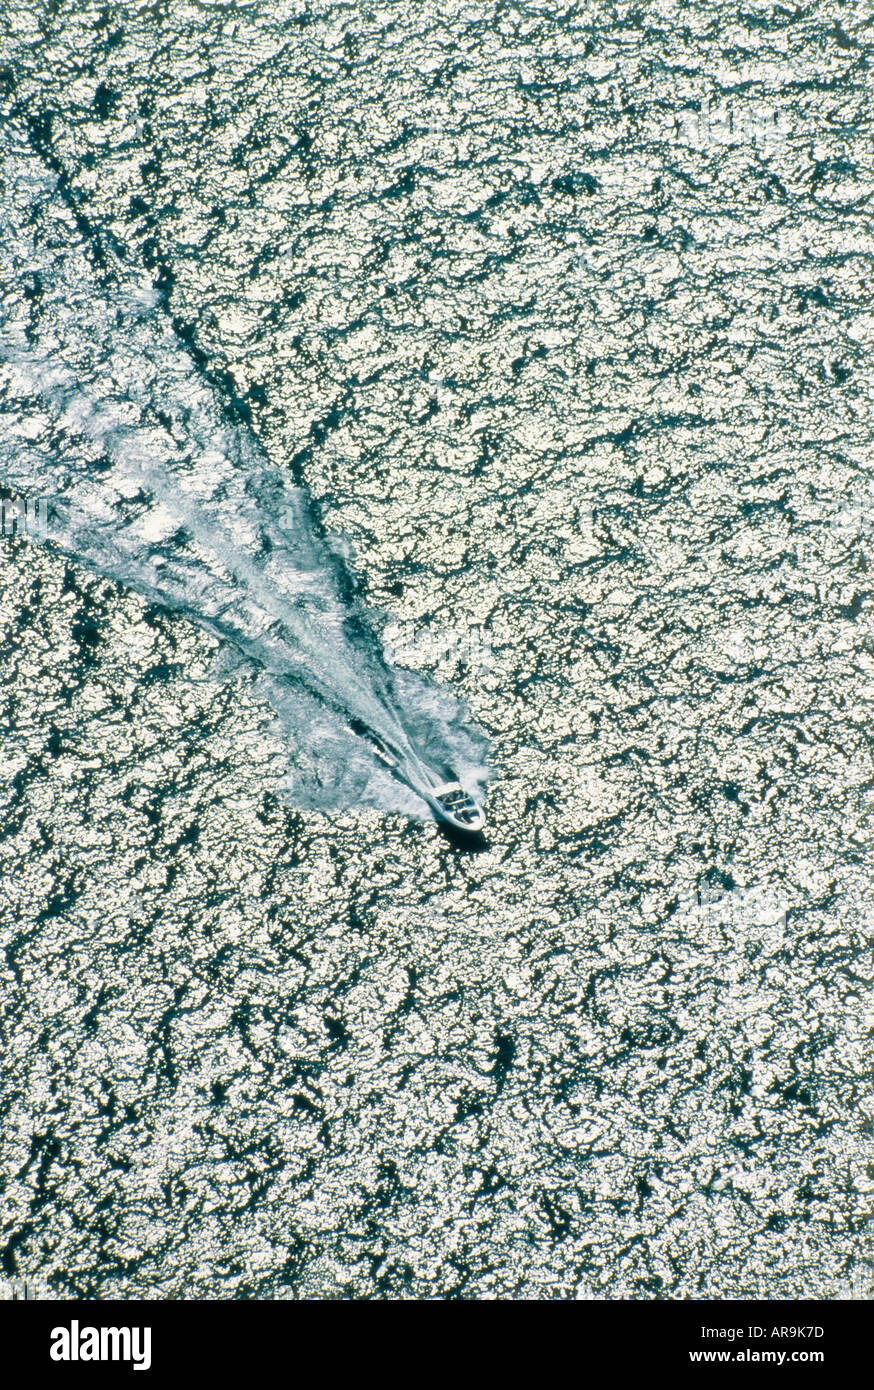 aerial view of speed boat on water sea lake with wake wave fanning out behind high speed aerial view from above Stock Photo